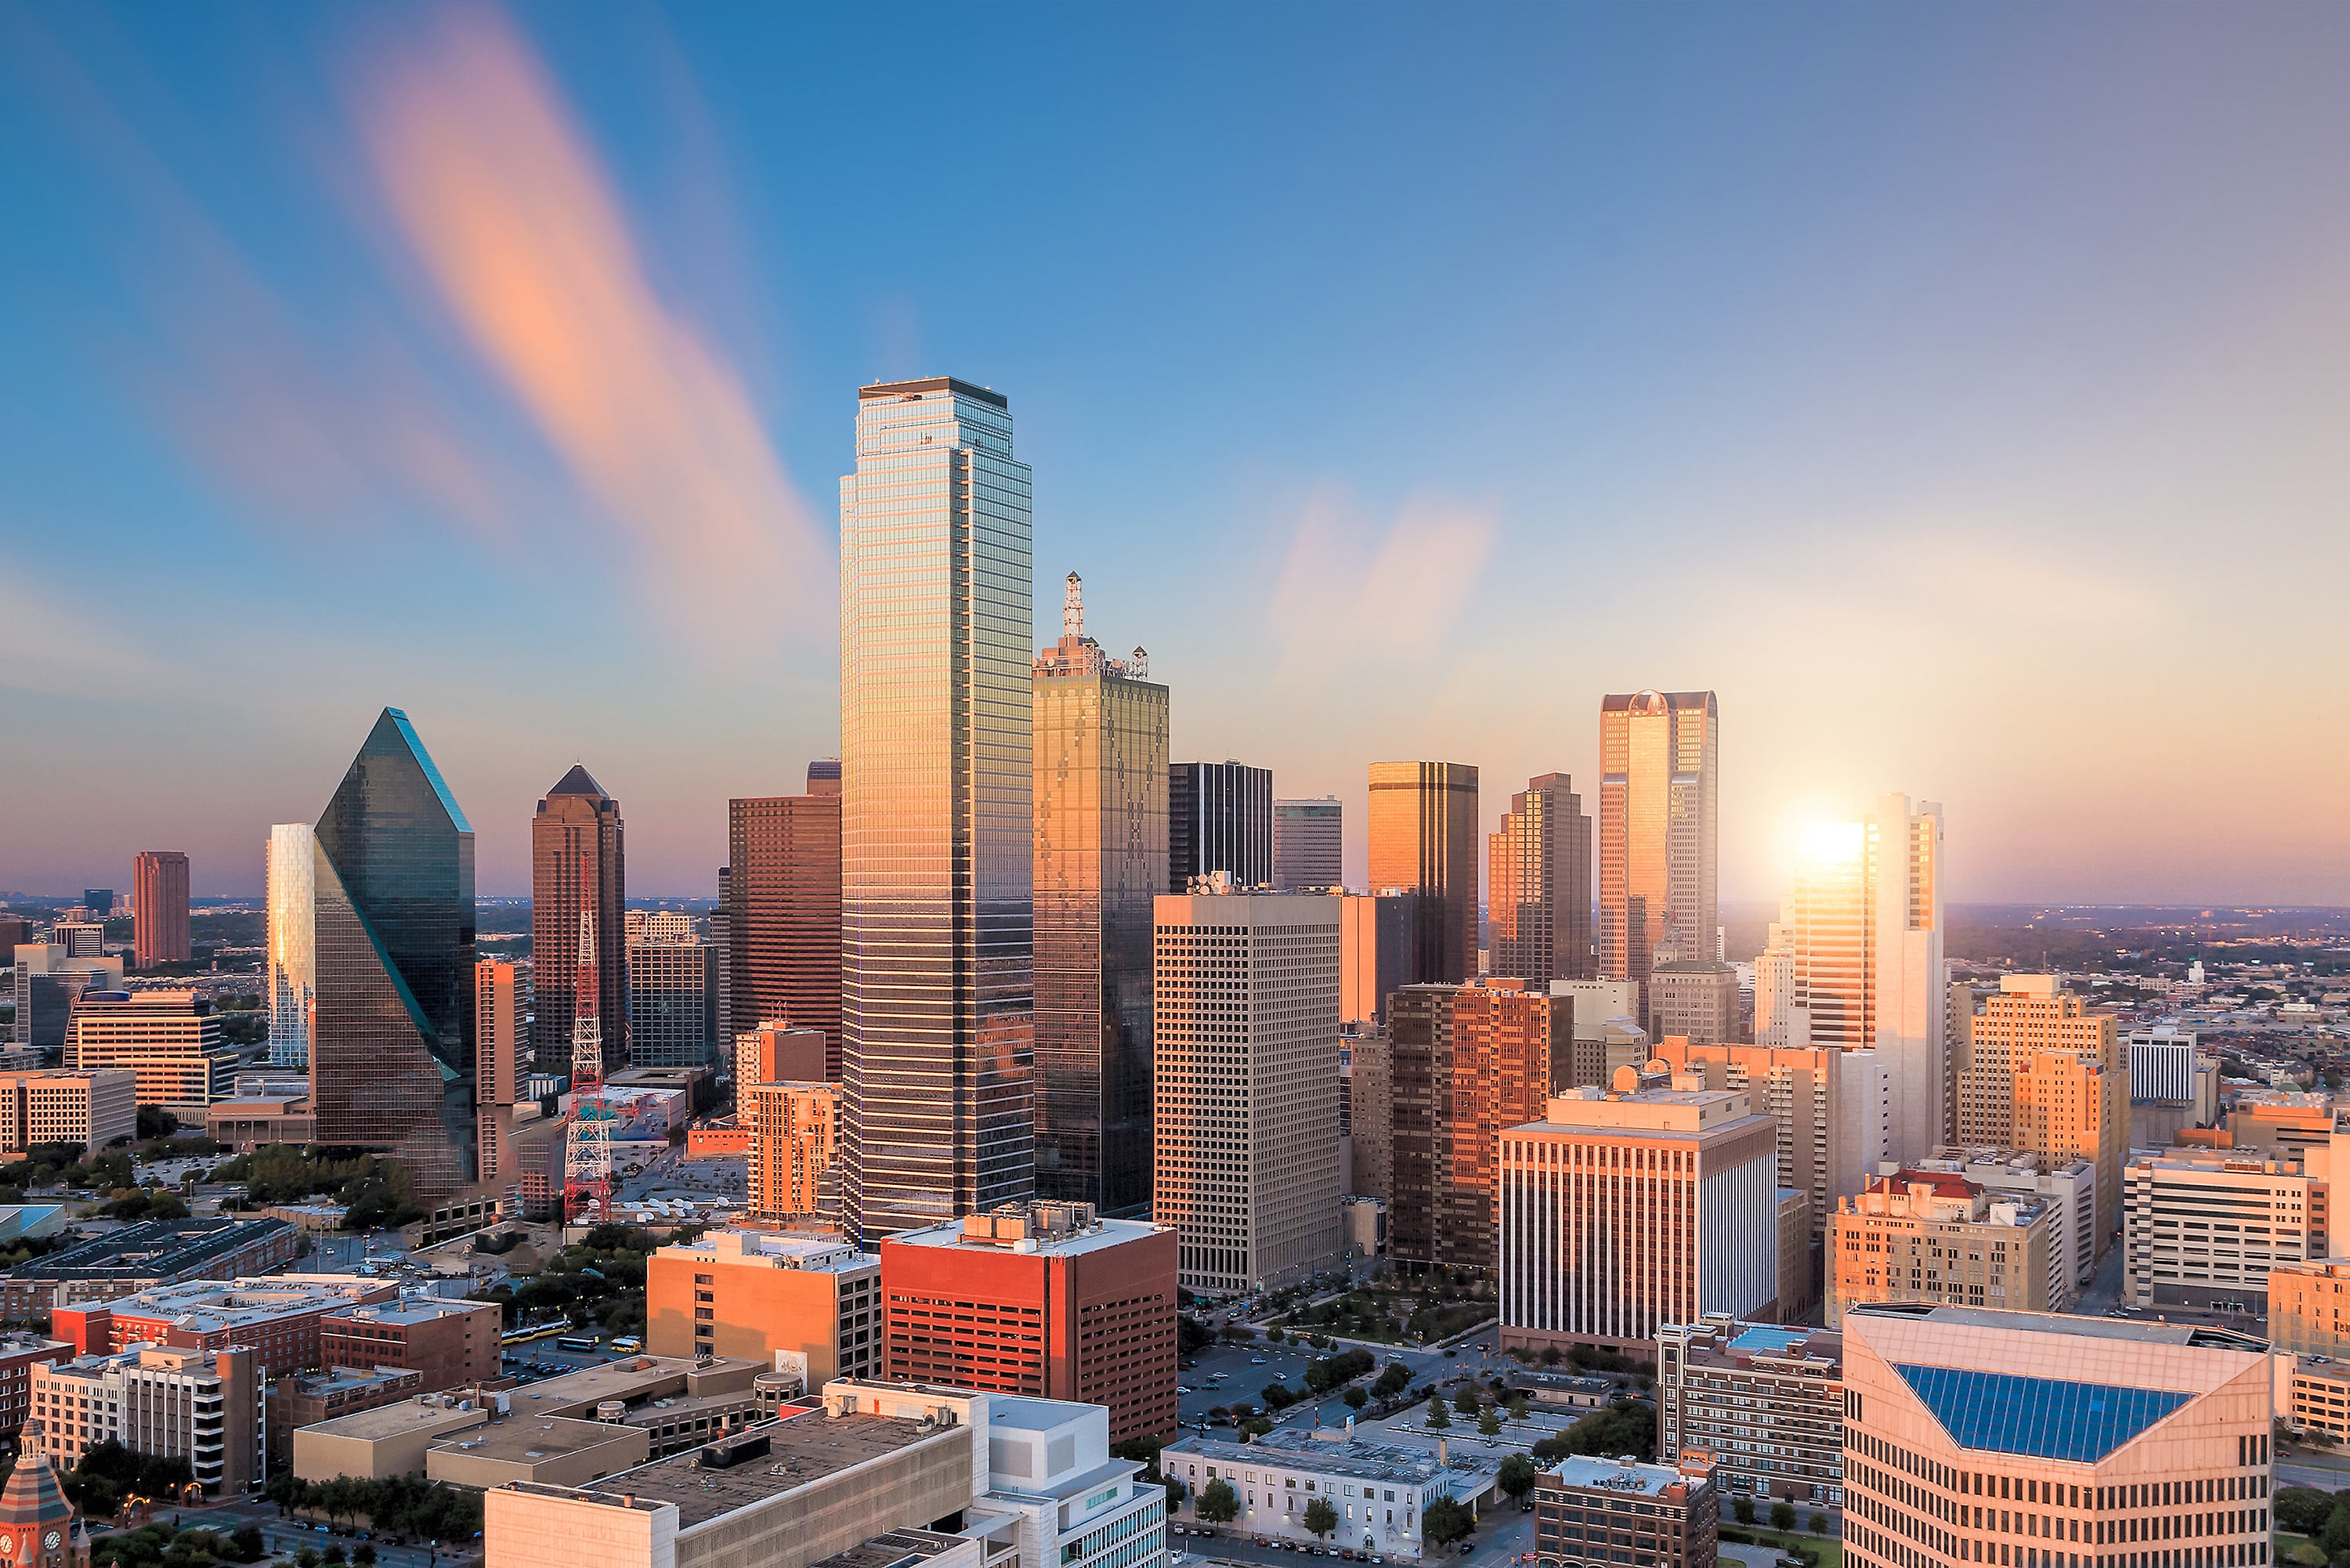 City Buildings in Dallas, Texas at Sunset